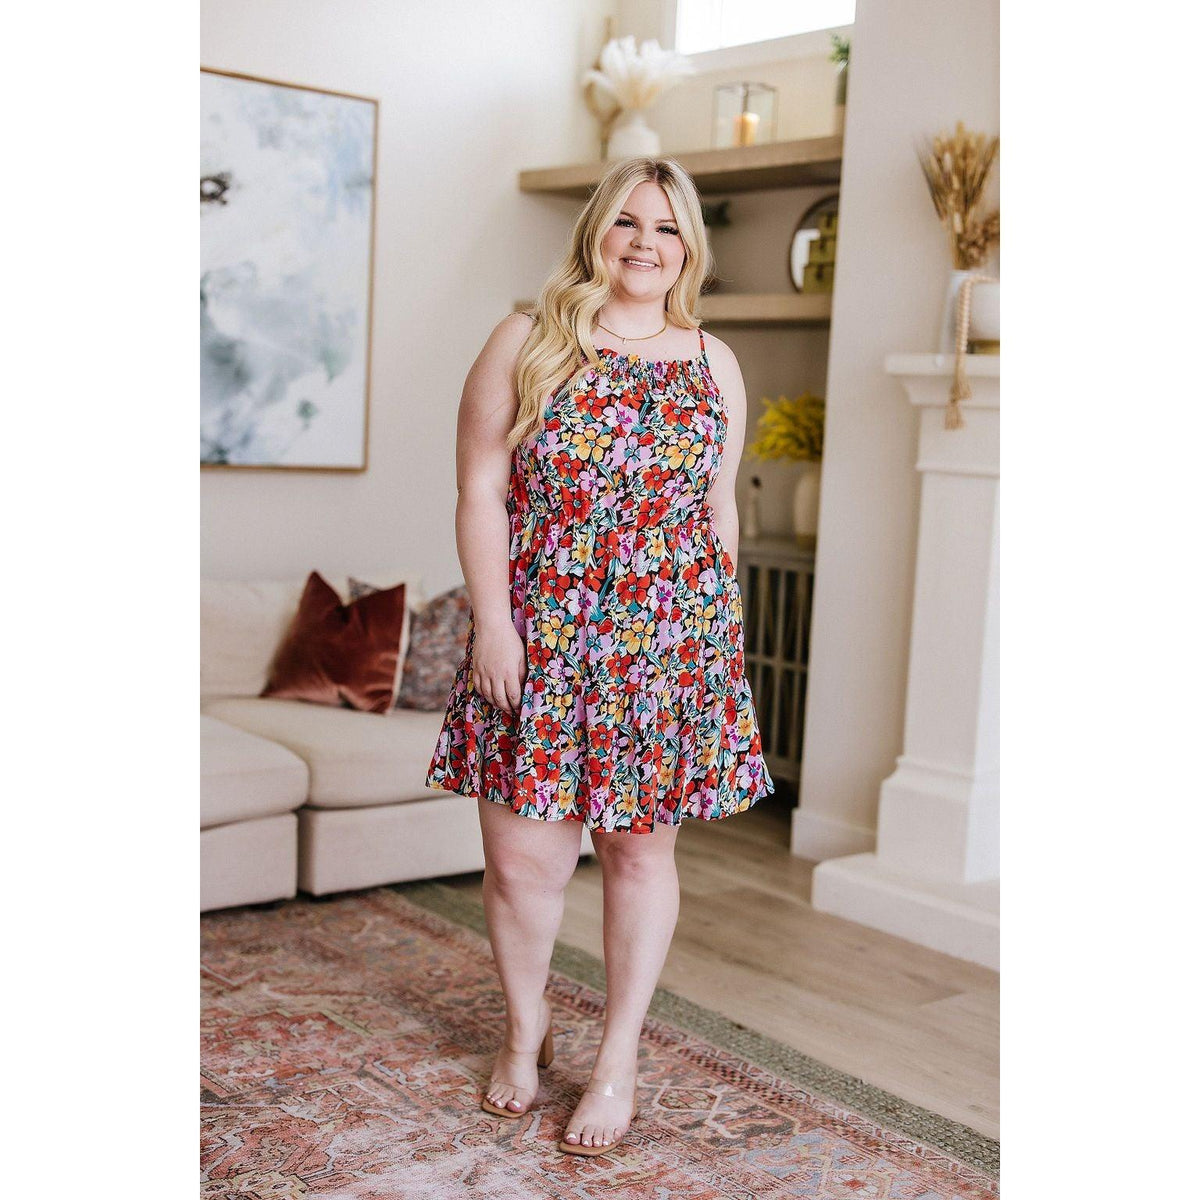 My Side of the Story Floral Dress - becauseofadi